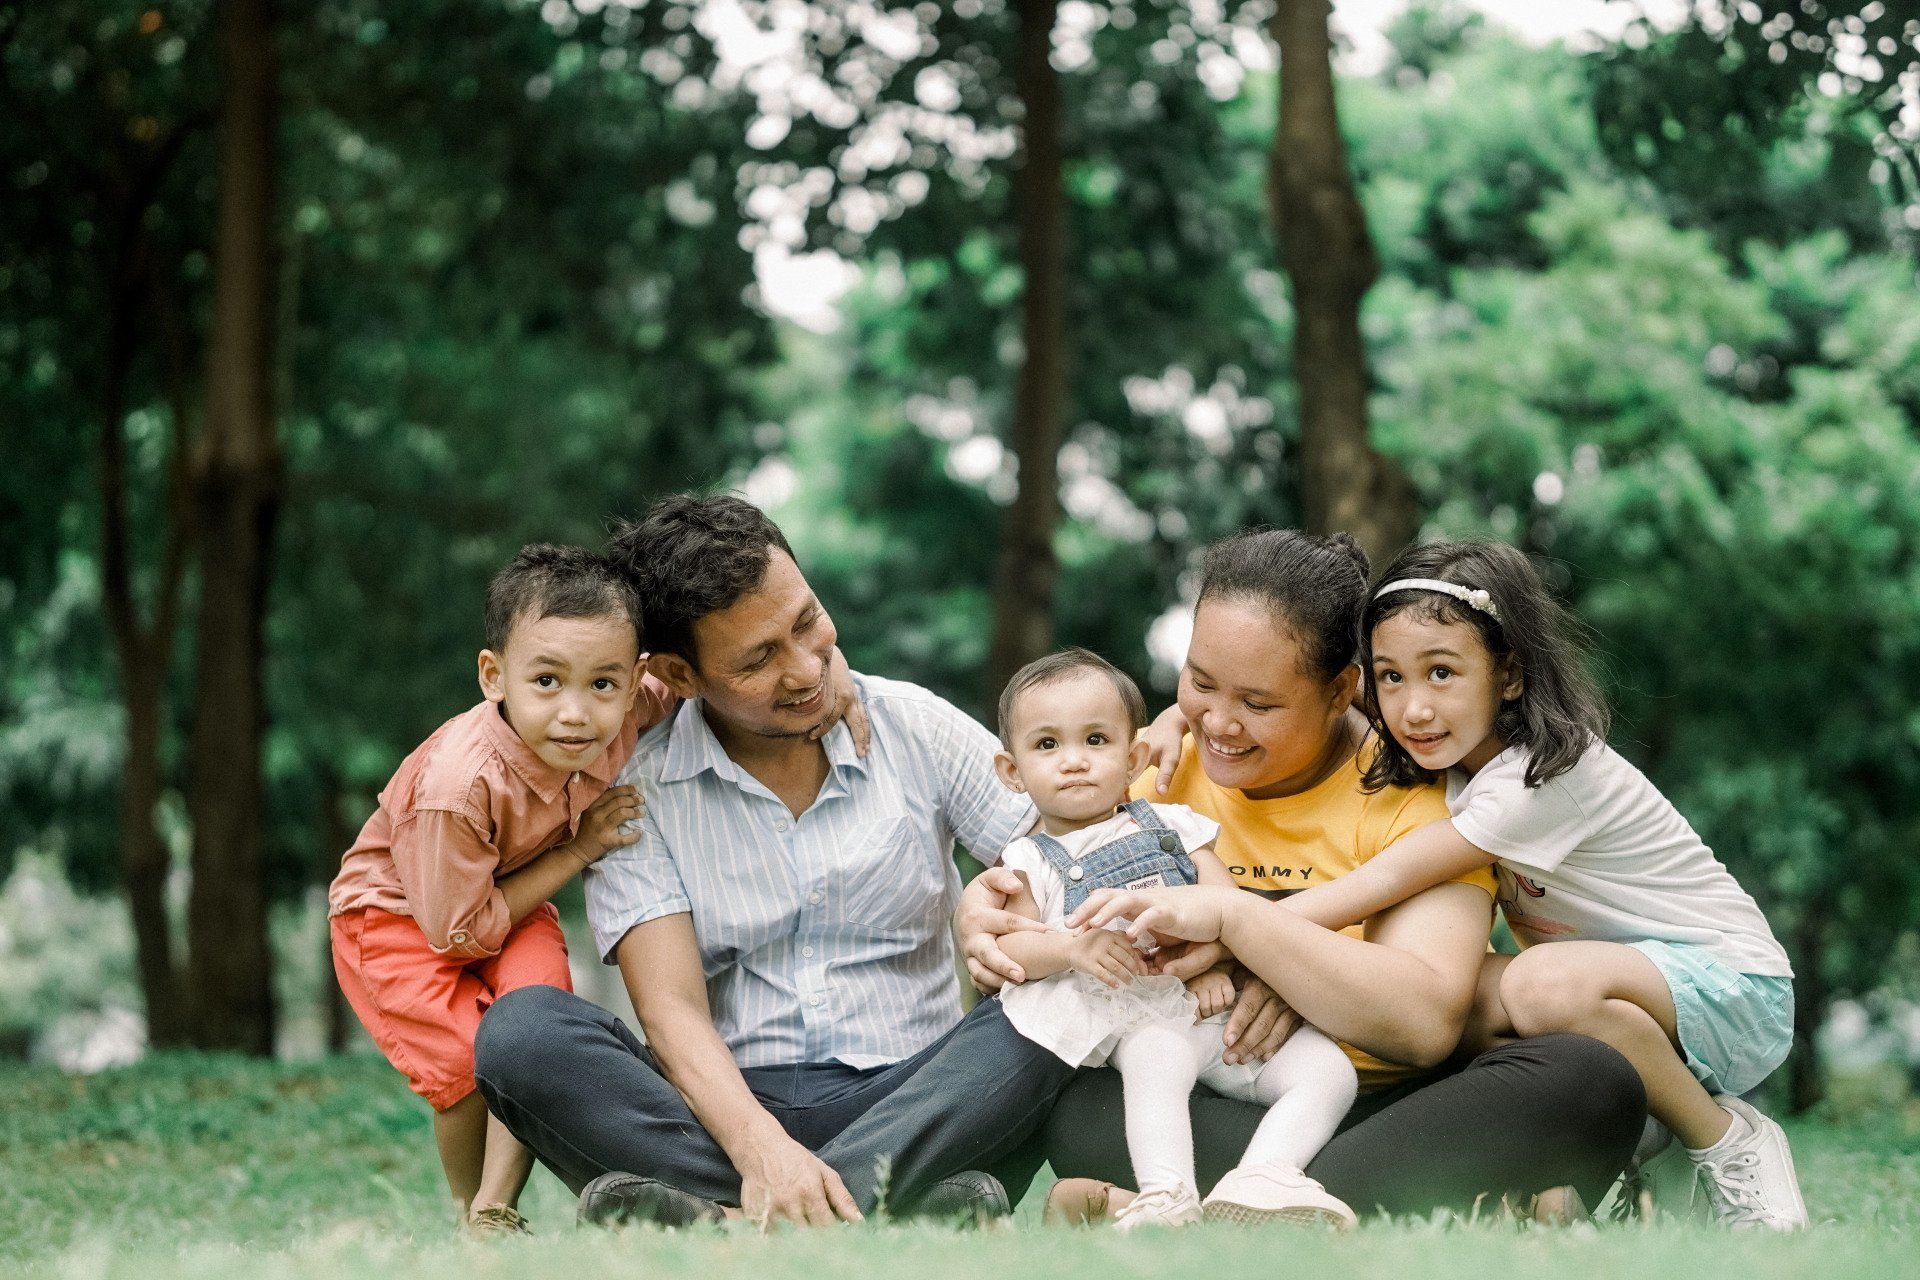 A family sitting on the grass in a park